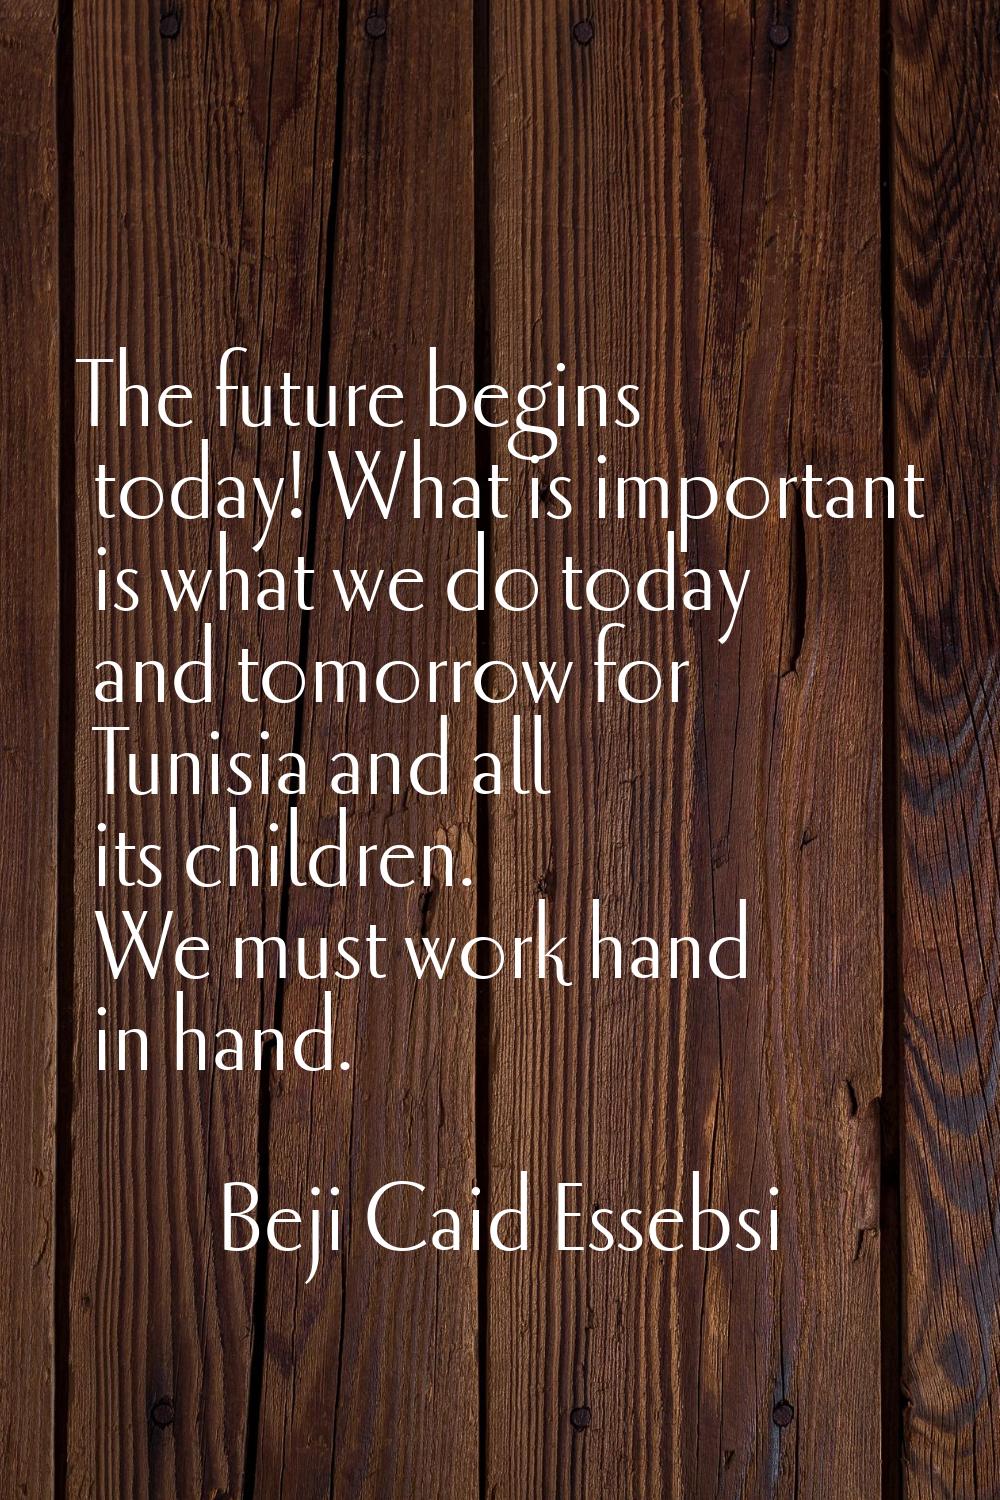 The future begins today! What is important is what we do today and tomorrow for Tunisia and all its